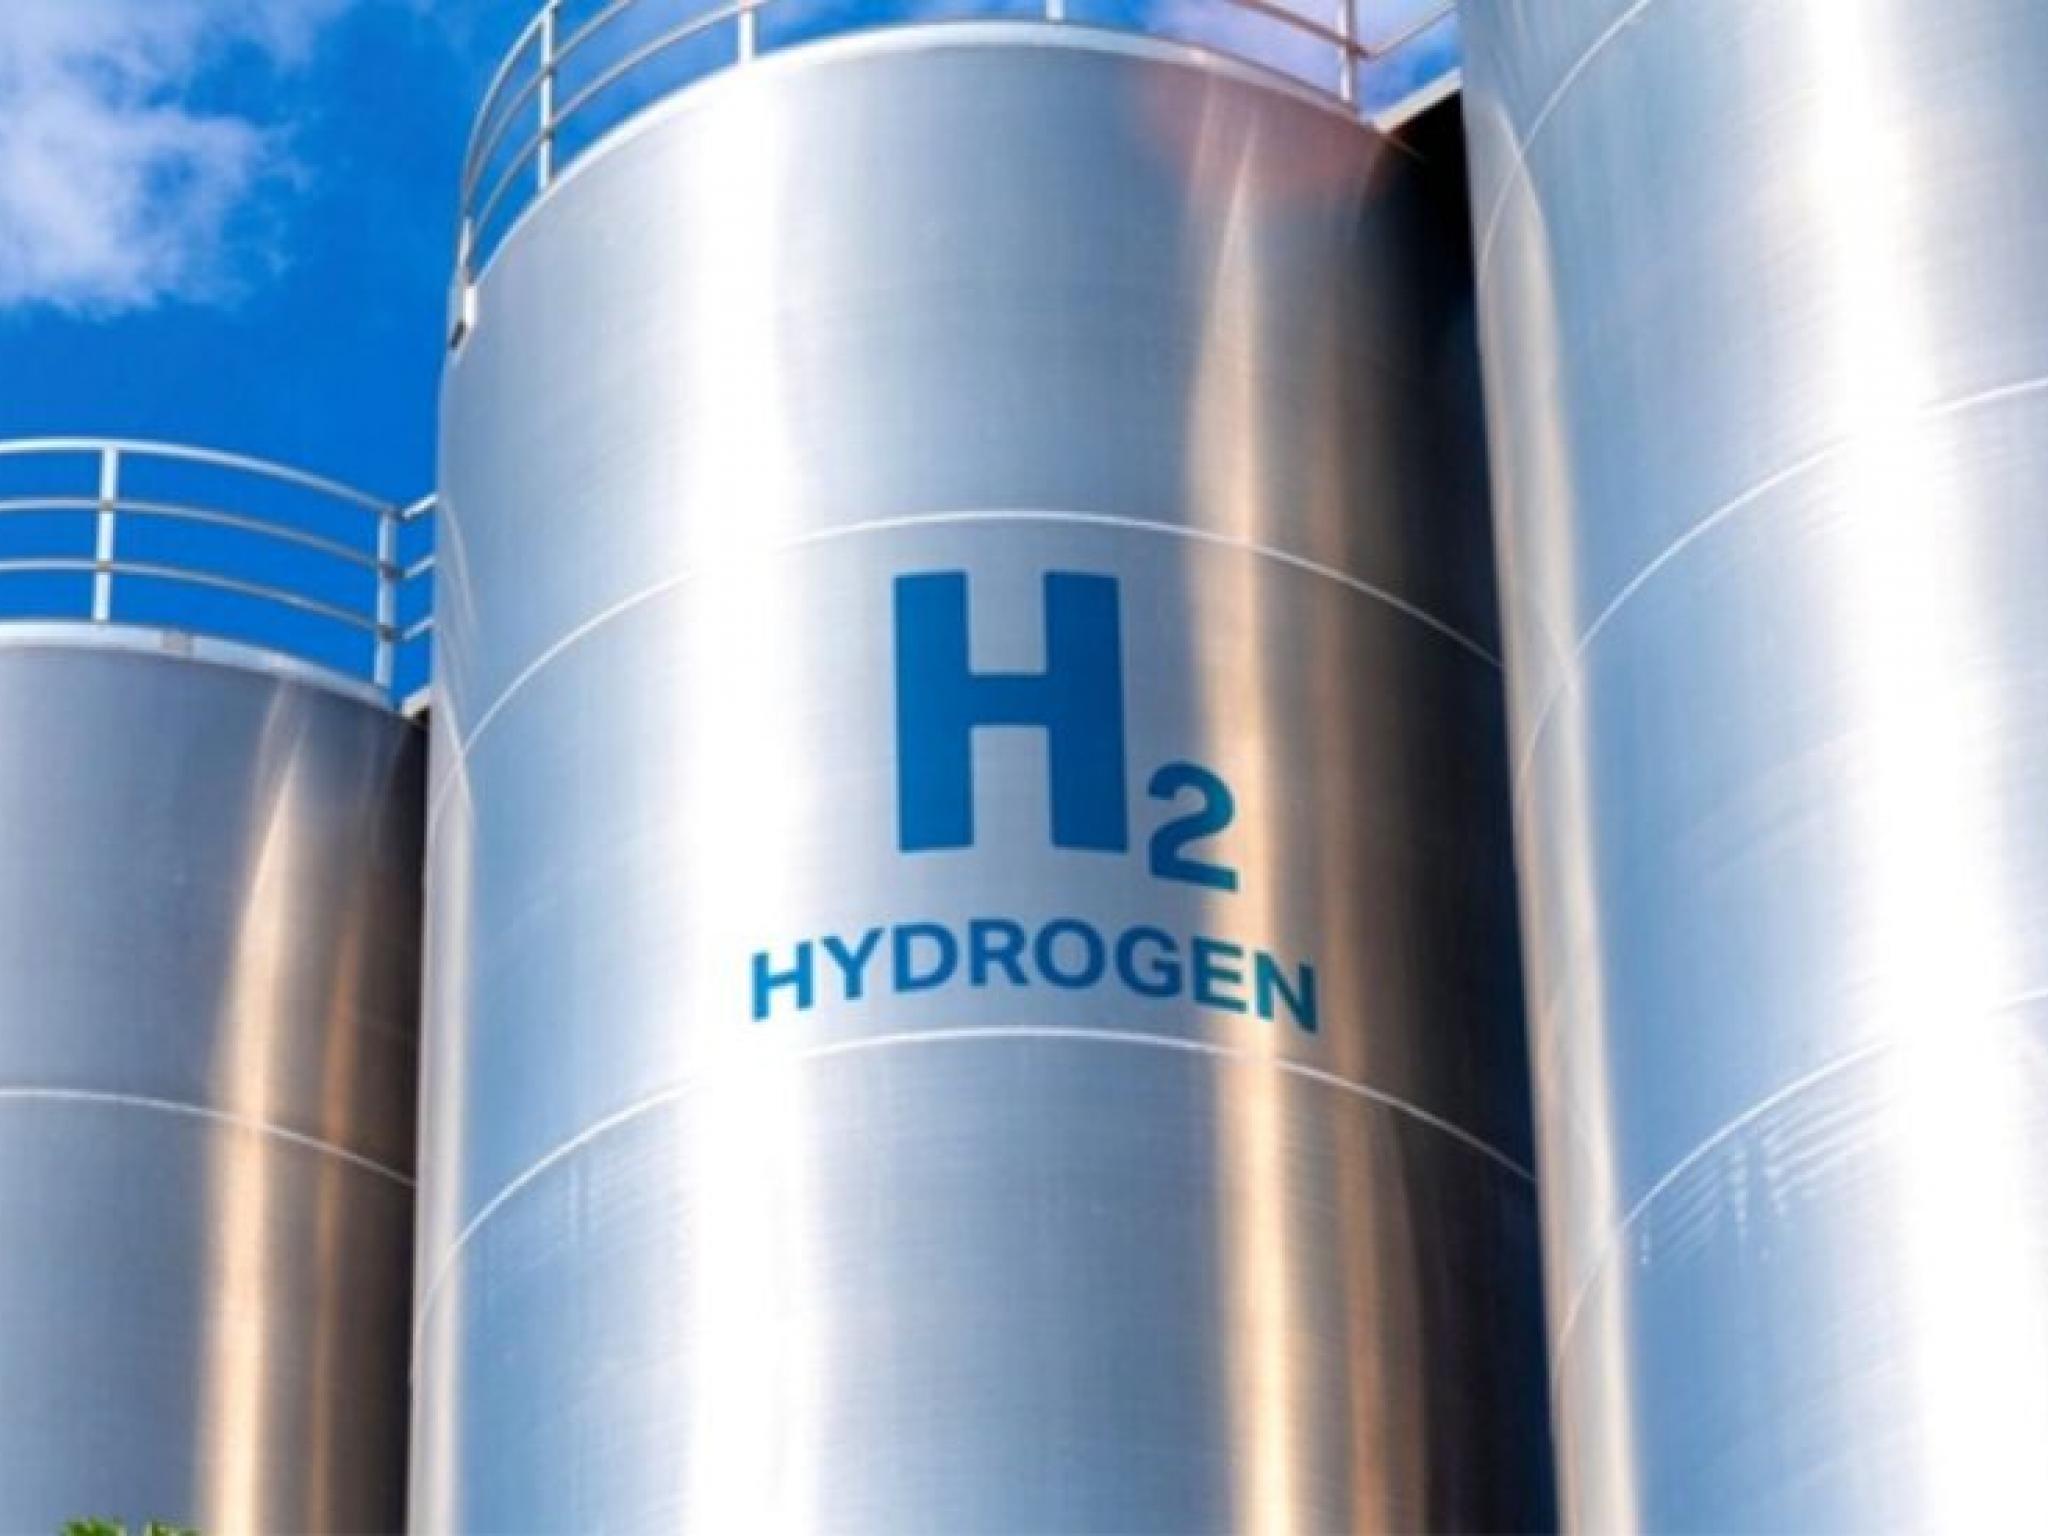  hydrogens-make-or-break-moment-industry-awaits-key-treasury-decision-on-tax-credits 